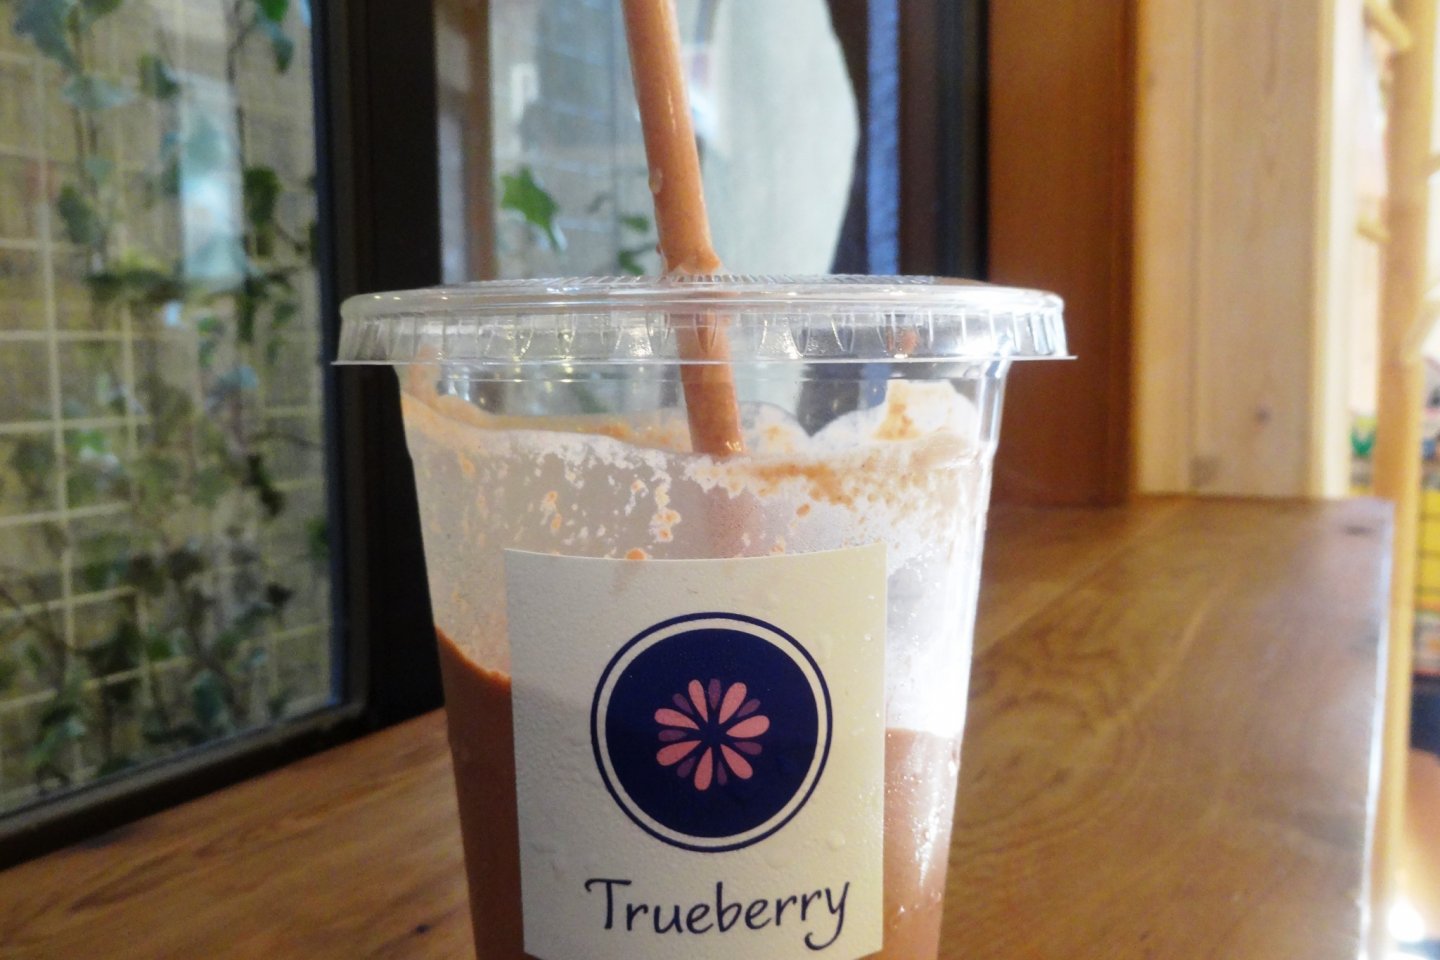 One of Trueberry's many smoothies on offer